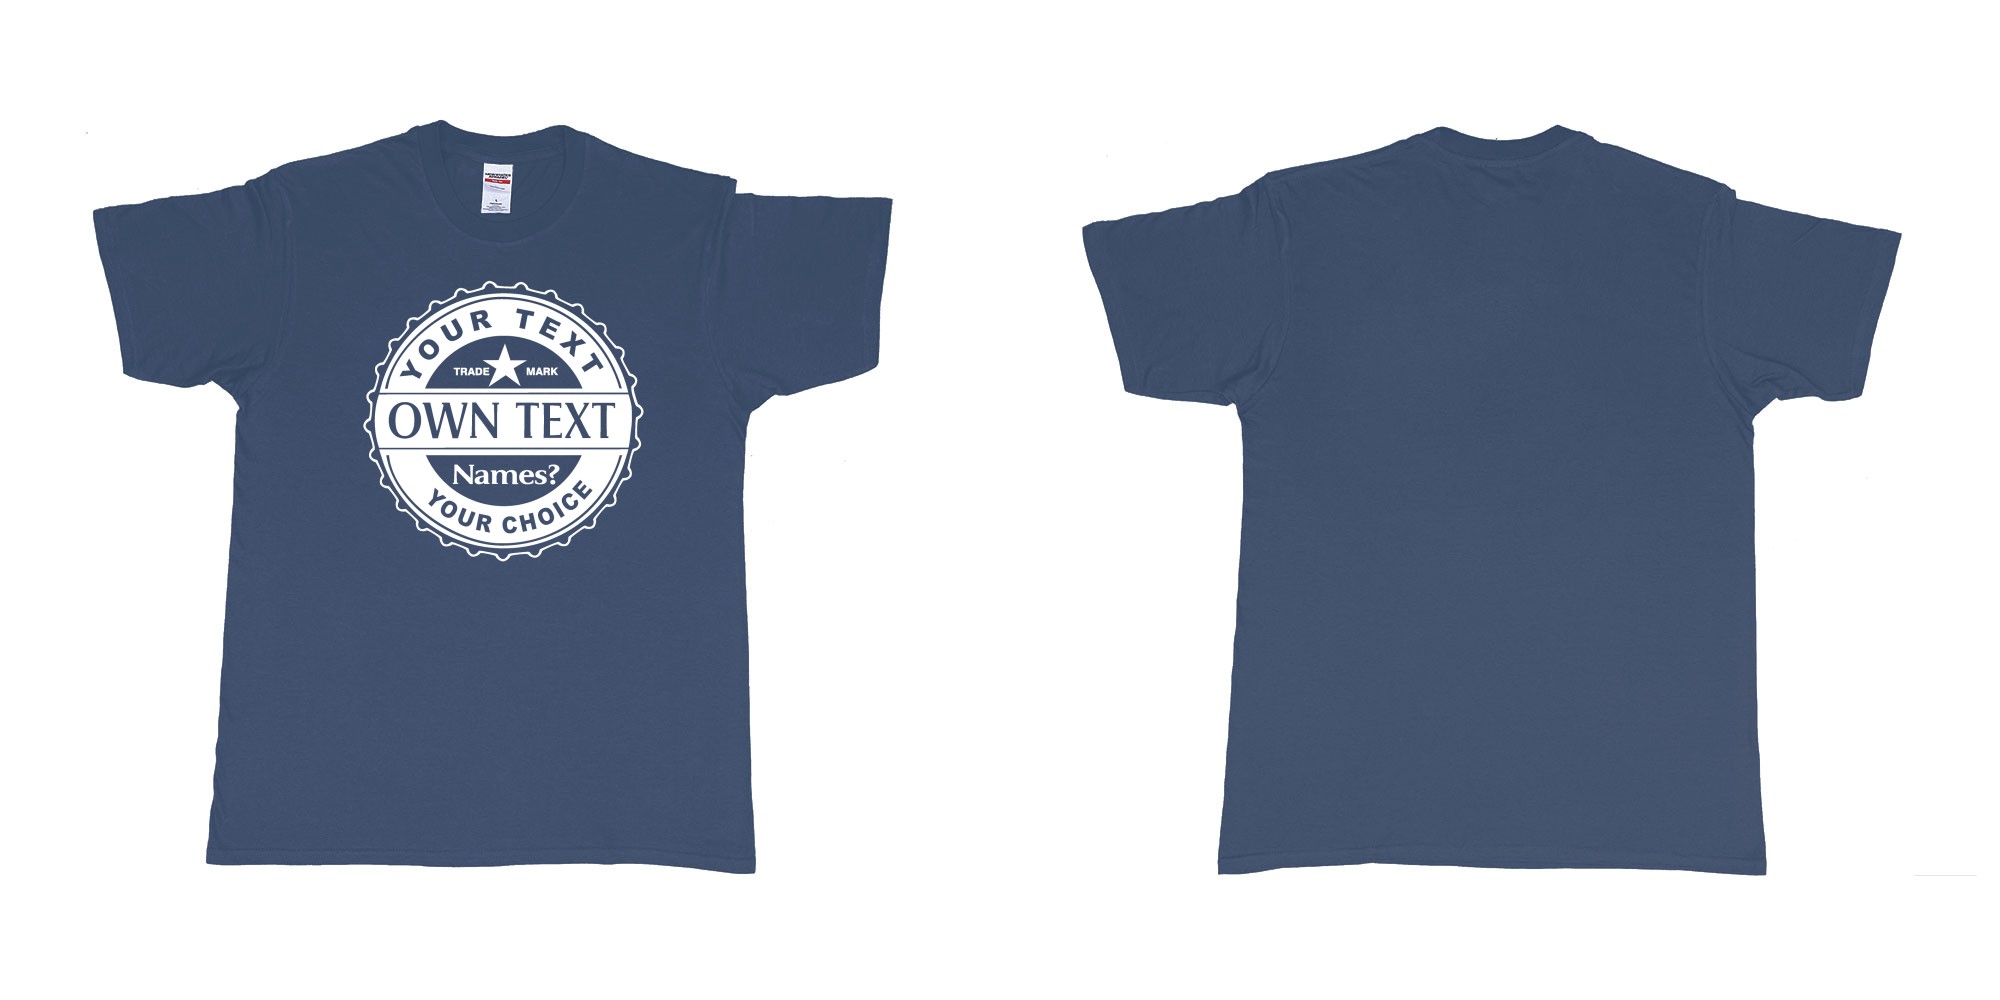 Custom tshirt design bintang classic strait one color in fabric color navy choice your own text made in Bali by The Pirate Way